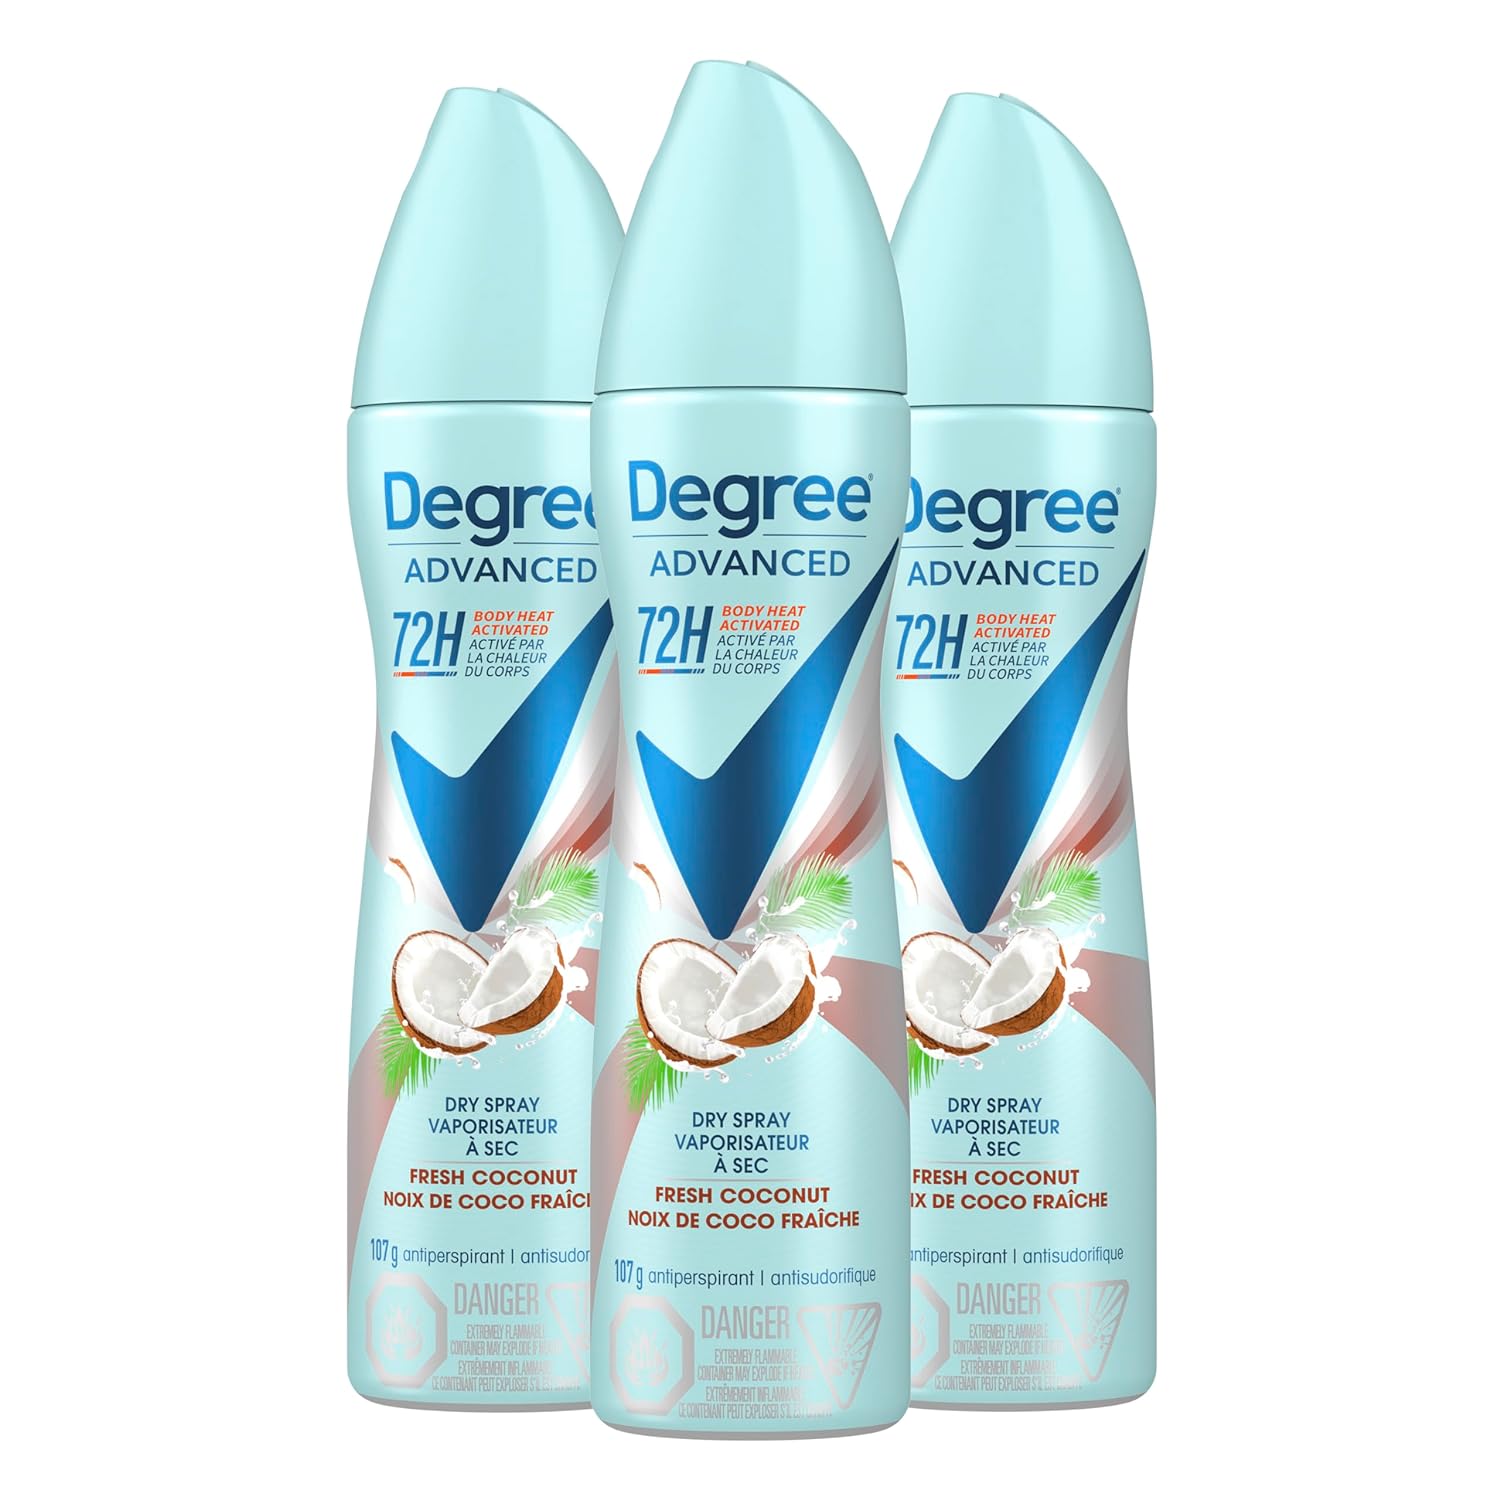 Degree Advanced Antiperspirant Deodorant Dry Spray Coconut & Hibiscus, 3 count 72-Hour Sweat & Odor Protection Deodorant Spray With MotionSense Technology 2.6 oz